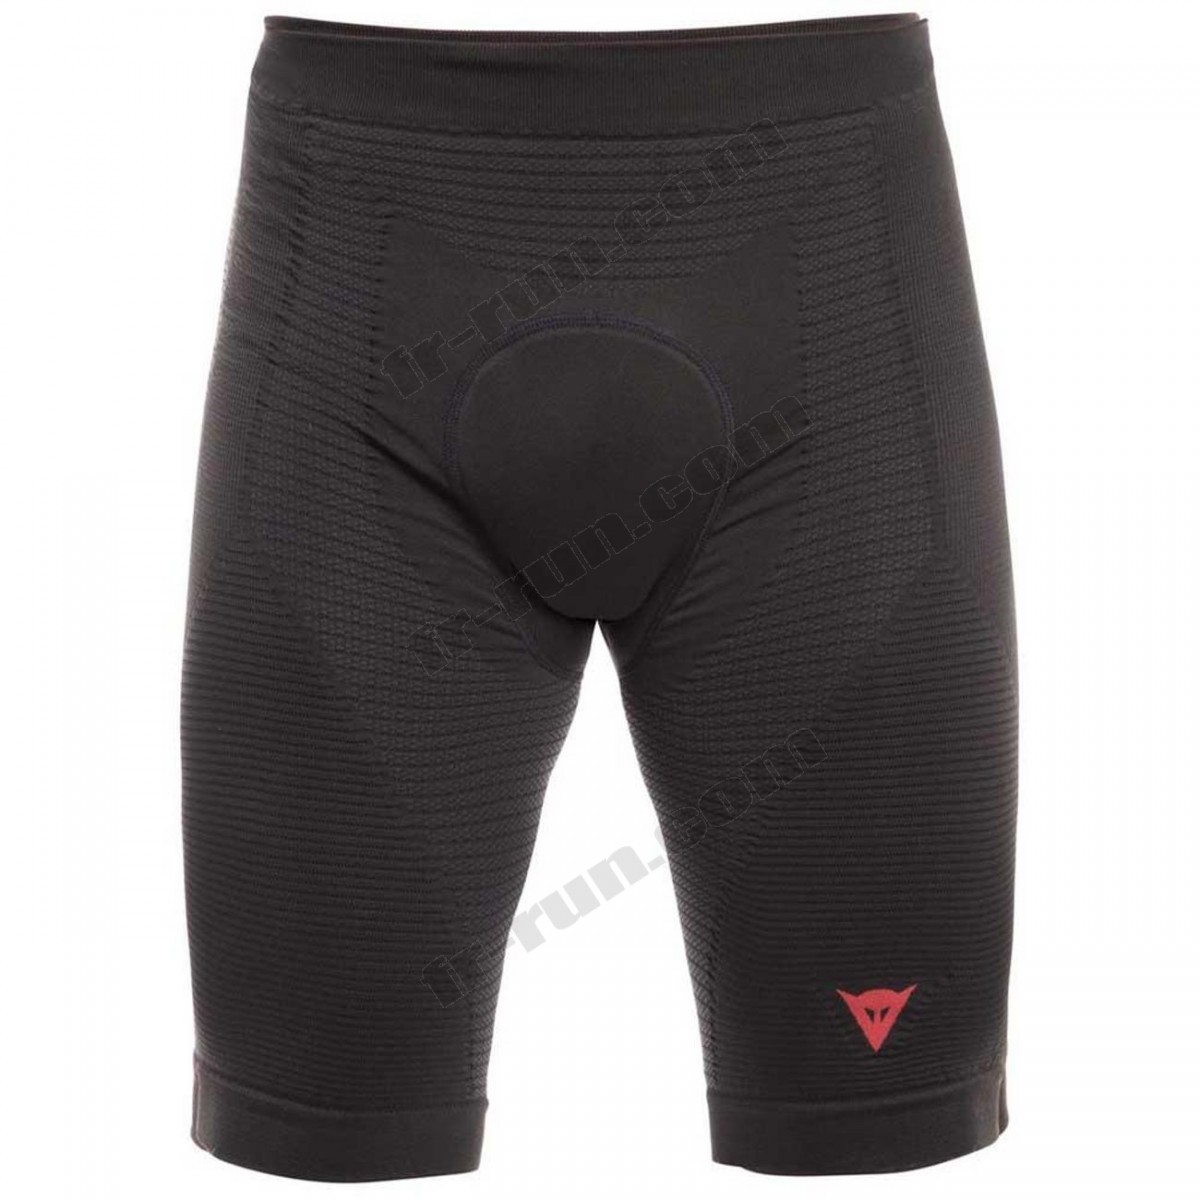 Dainese/Cycle homme DAINESE Dainese Trailknit Undershorts ◇◇◇ Pas Cher Du Tout - -1